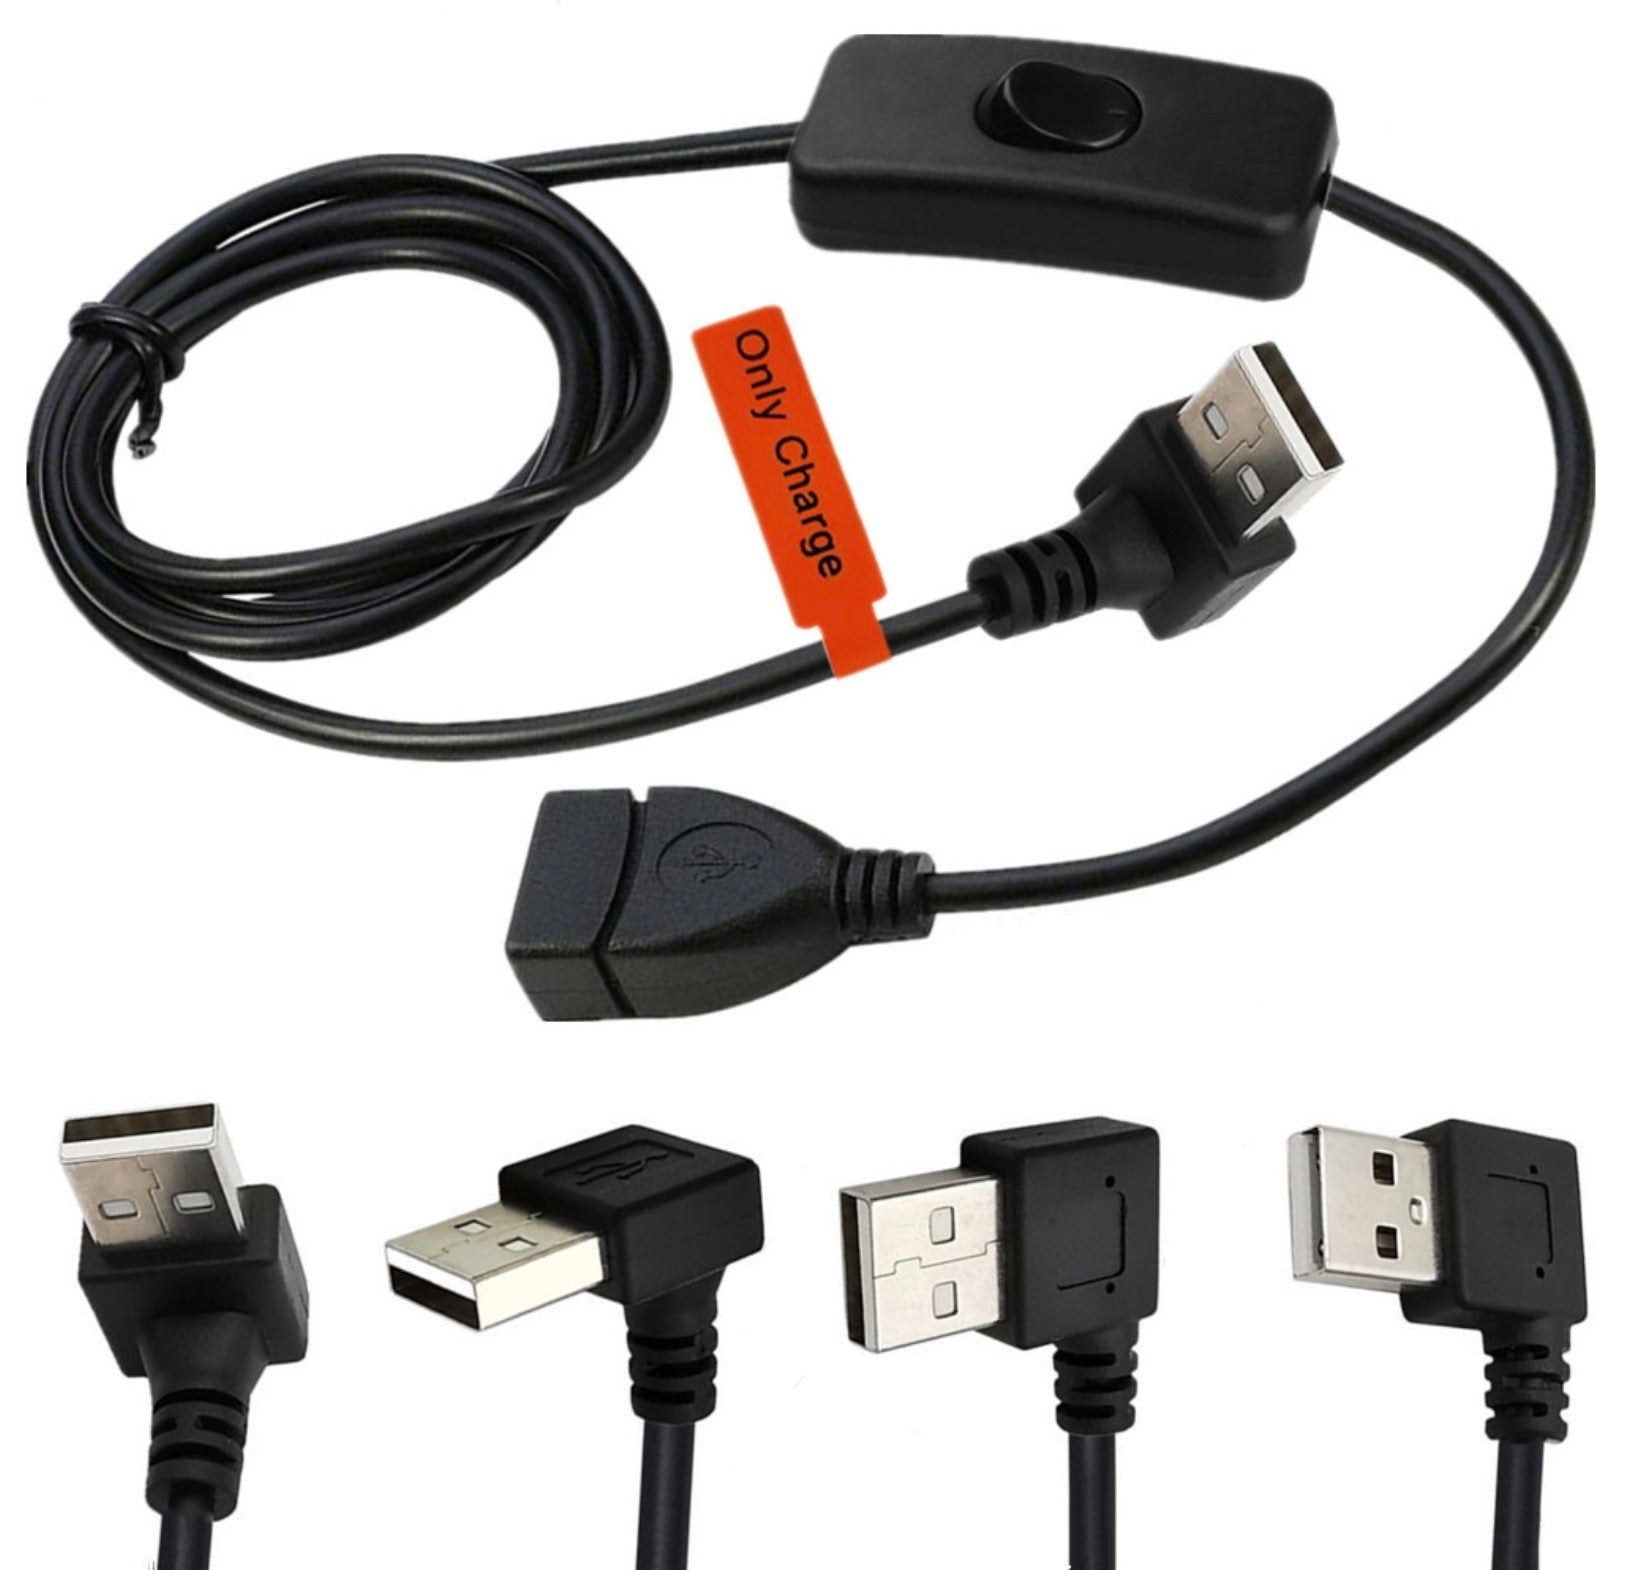 USB 2.0 A Male to Female 3A Charging Extension Cable with On/Off Switch 1m